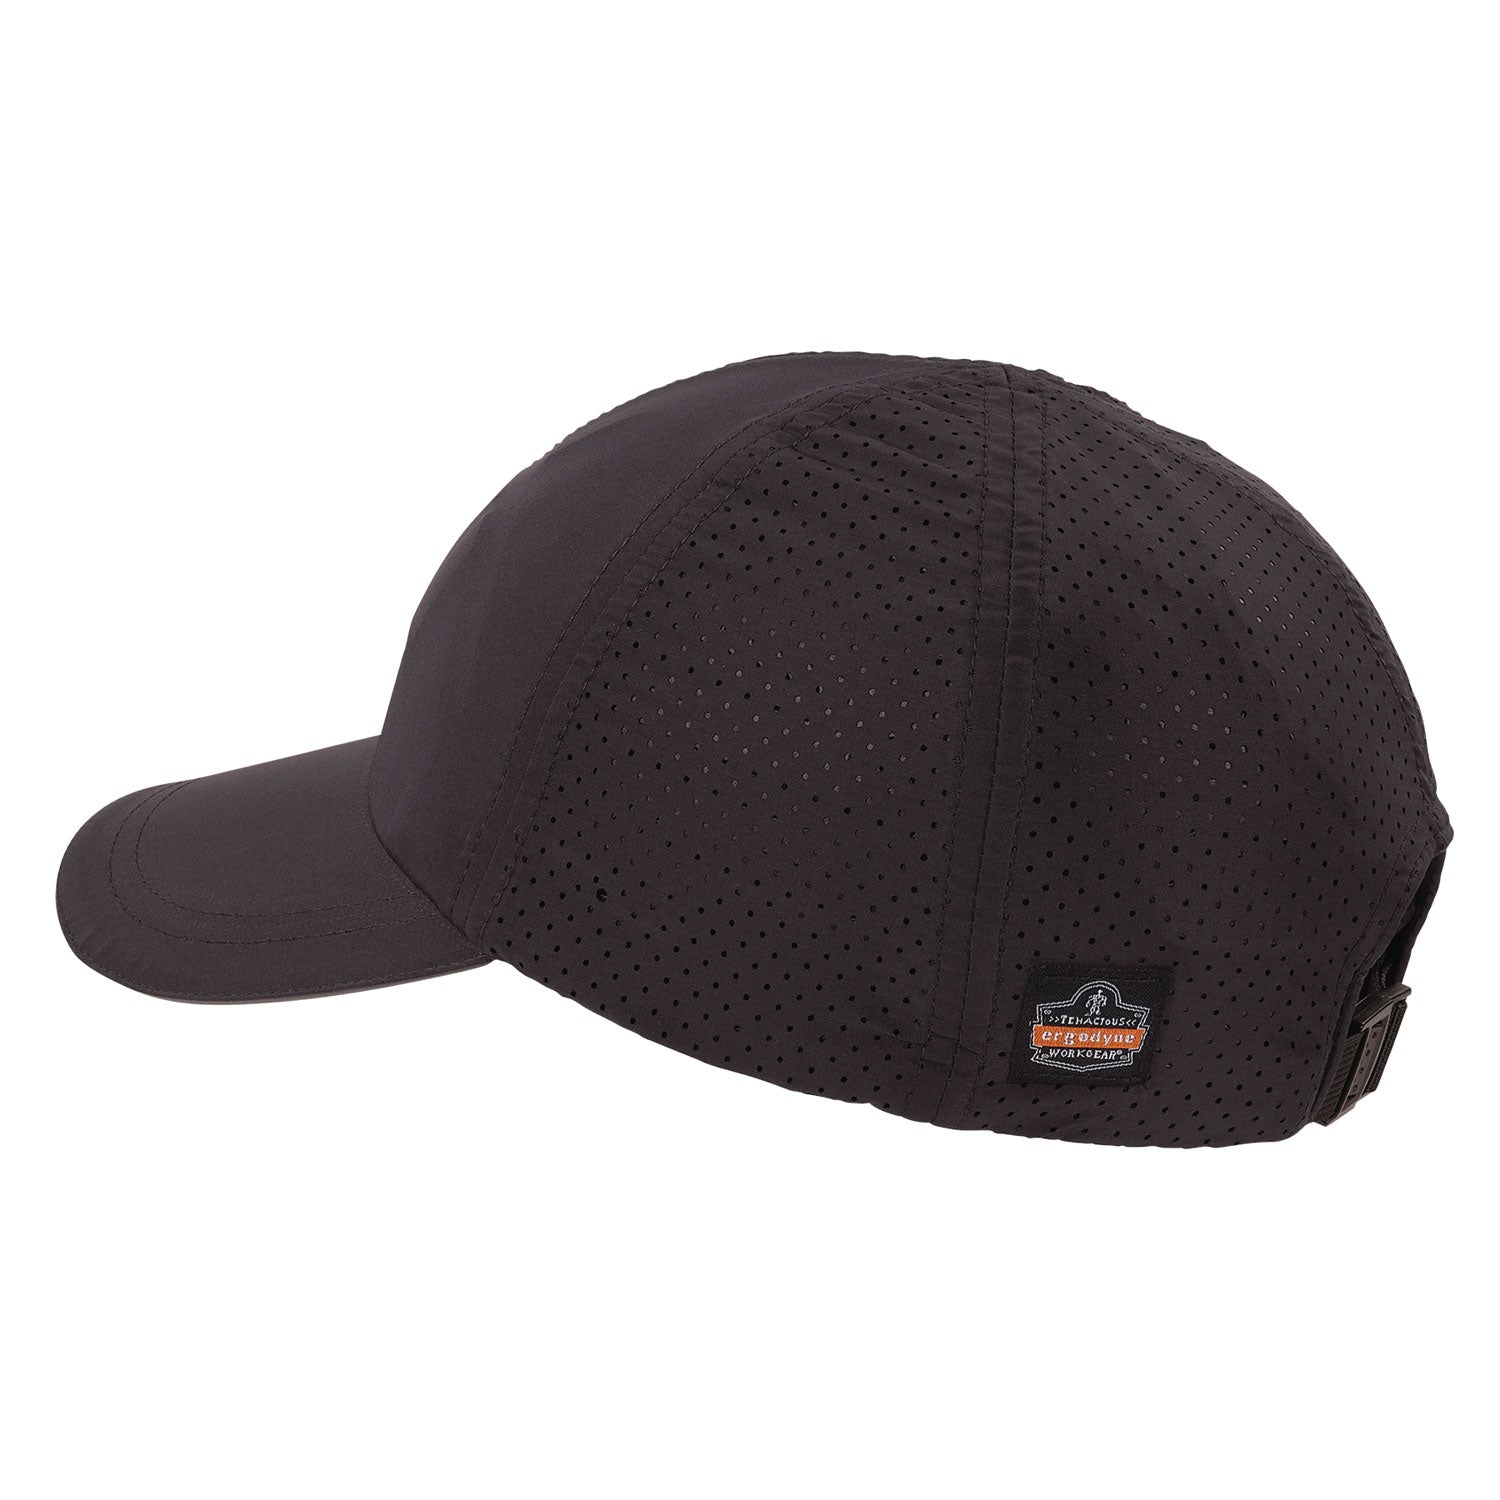 skullerz-8947-lightweight-baseball-hat-and-bump-cap-insert-x-small-small-black-ships-in-1-3-business-days_ego23450 - 2